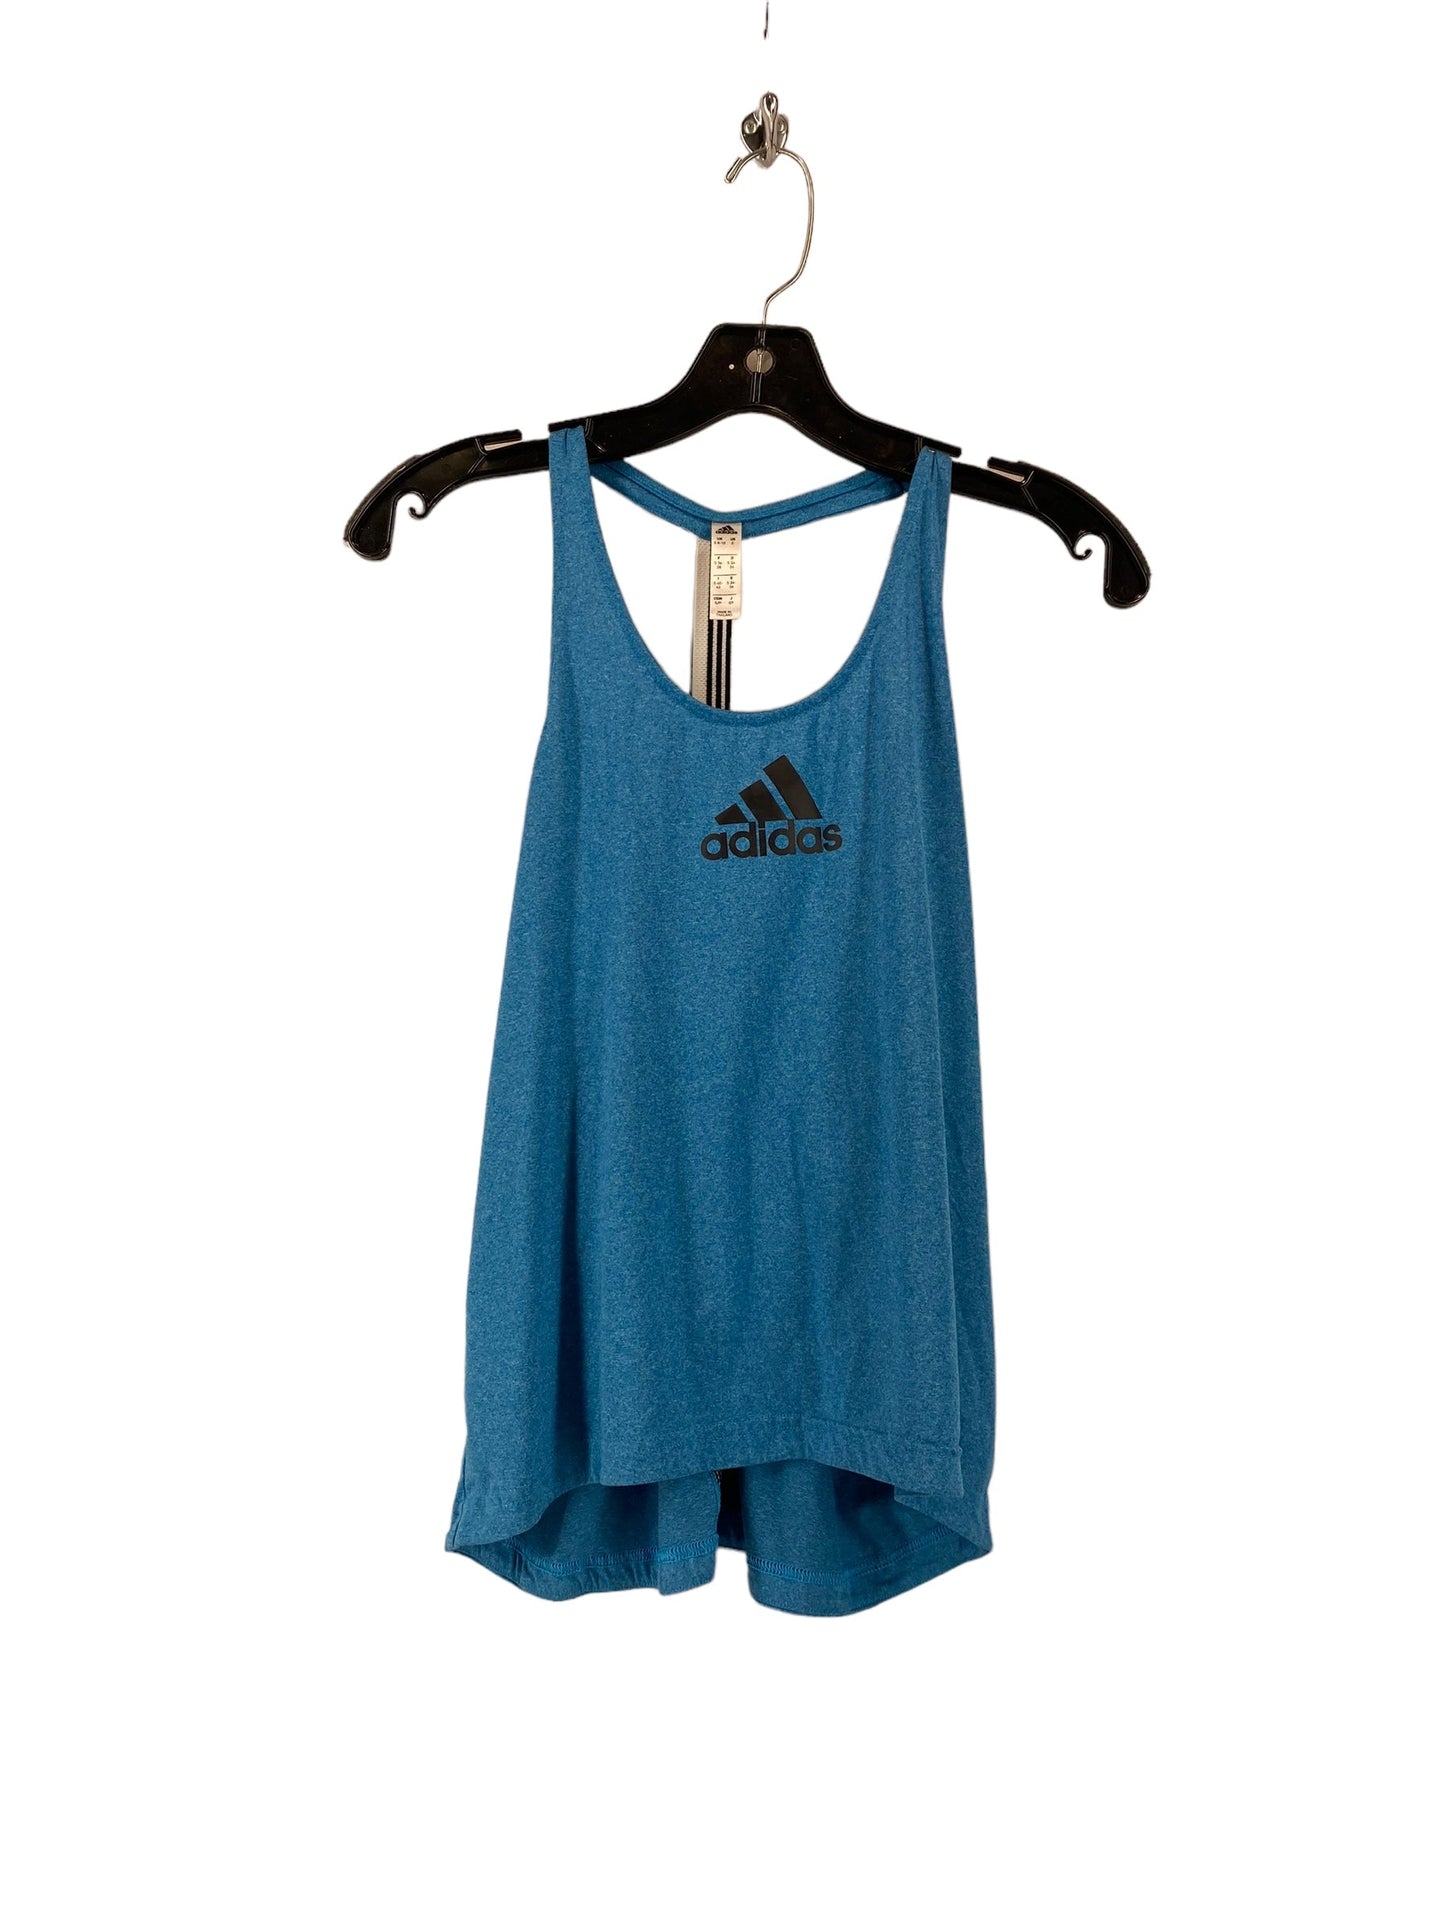 Blue Athletic Tank Top Adidas, Size S